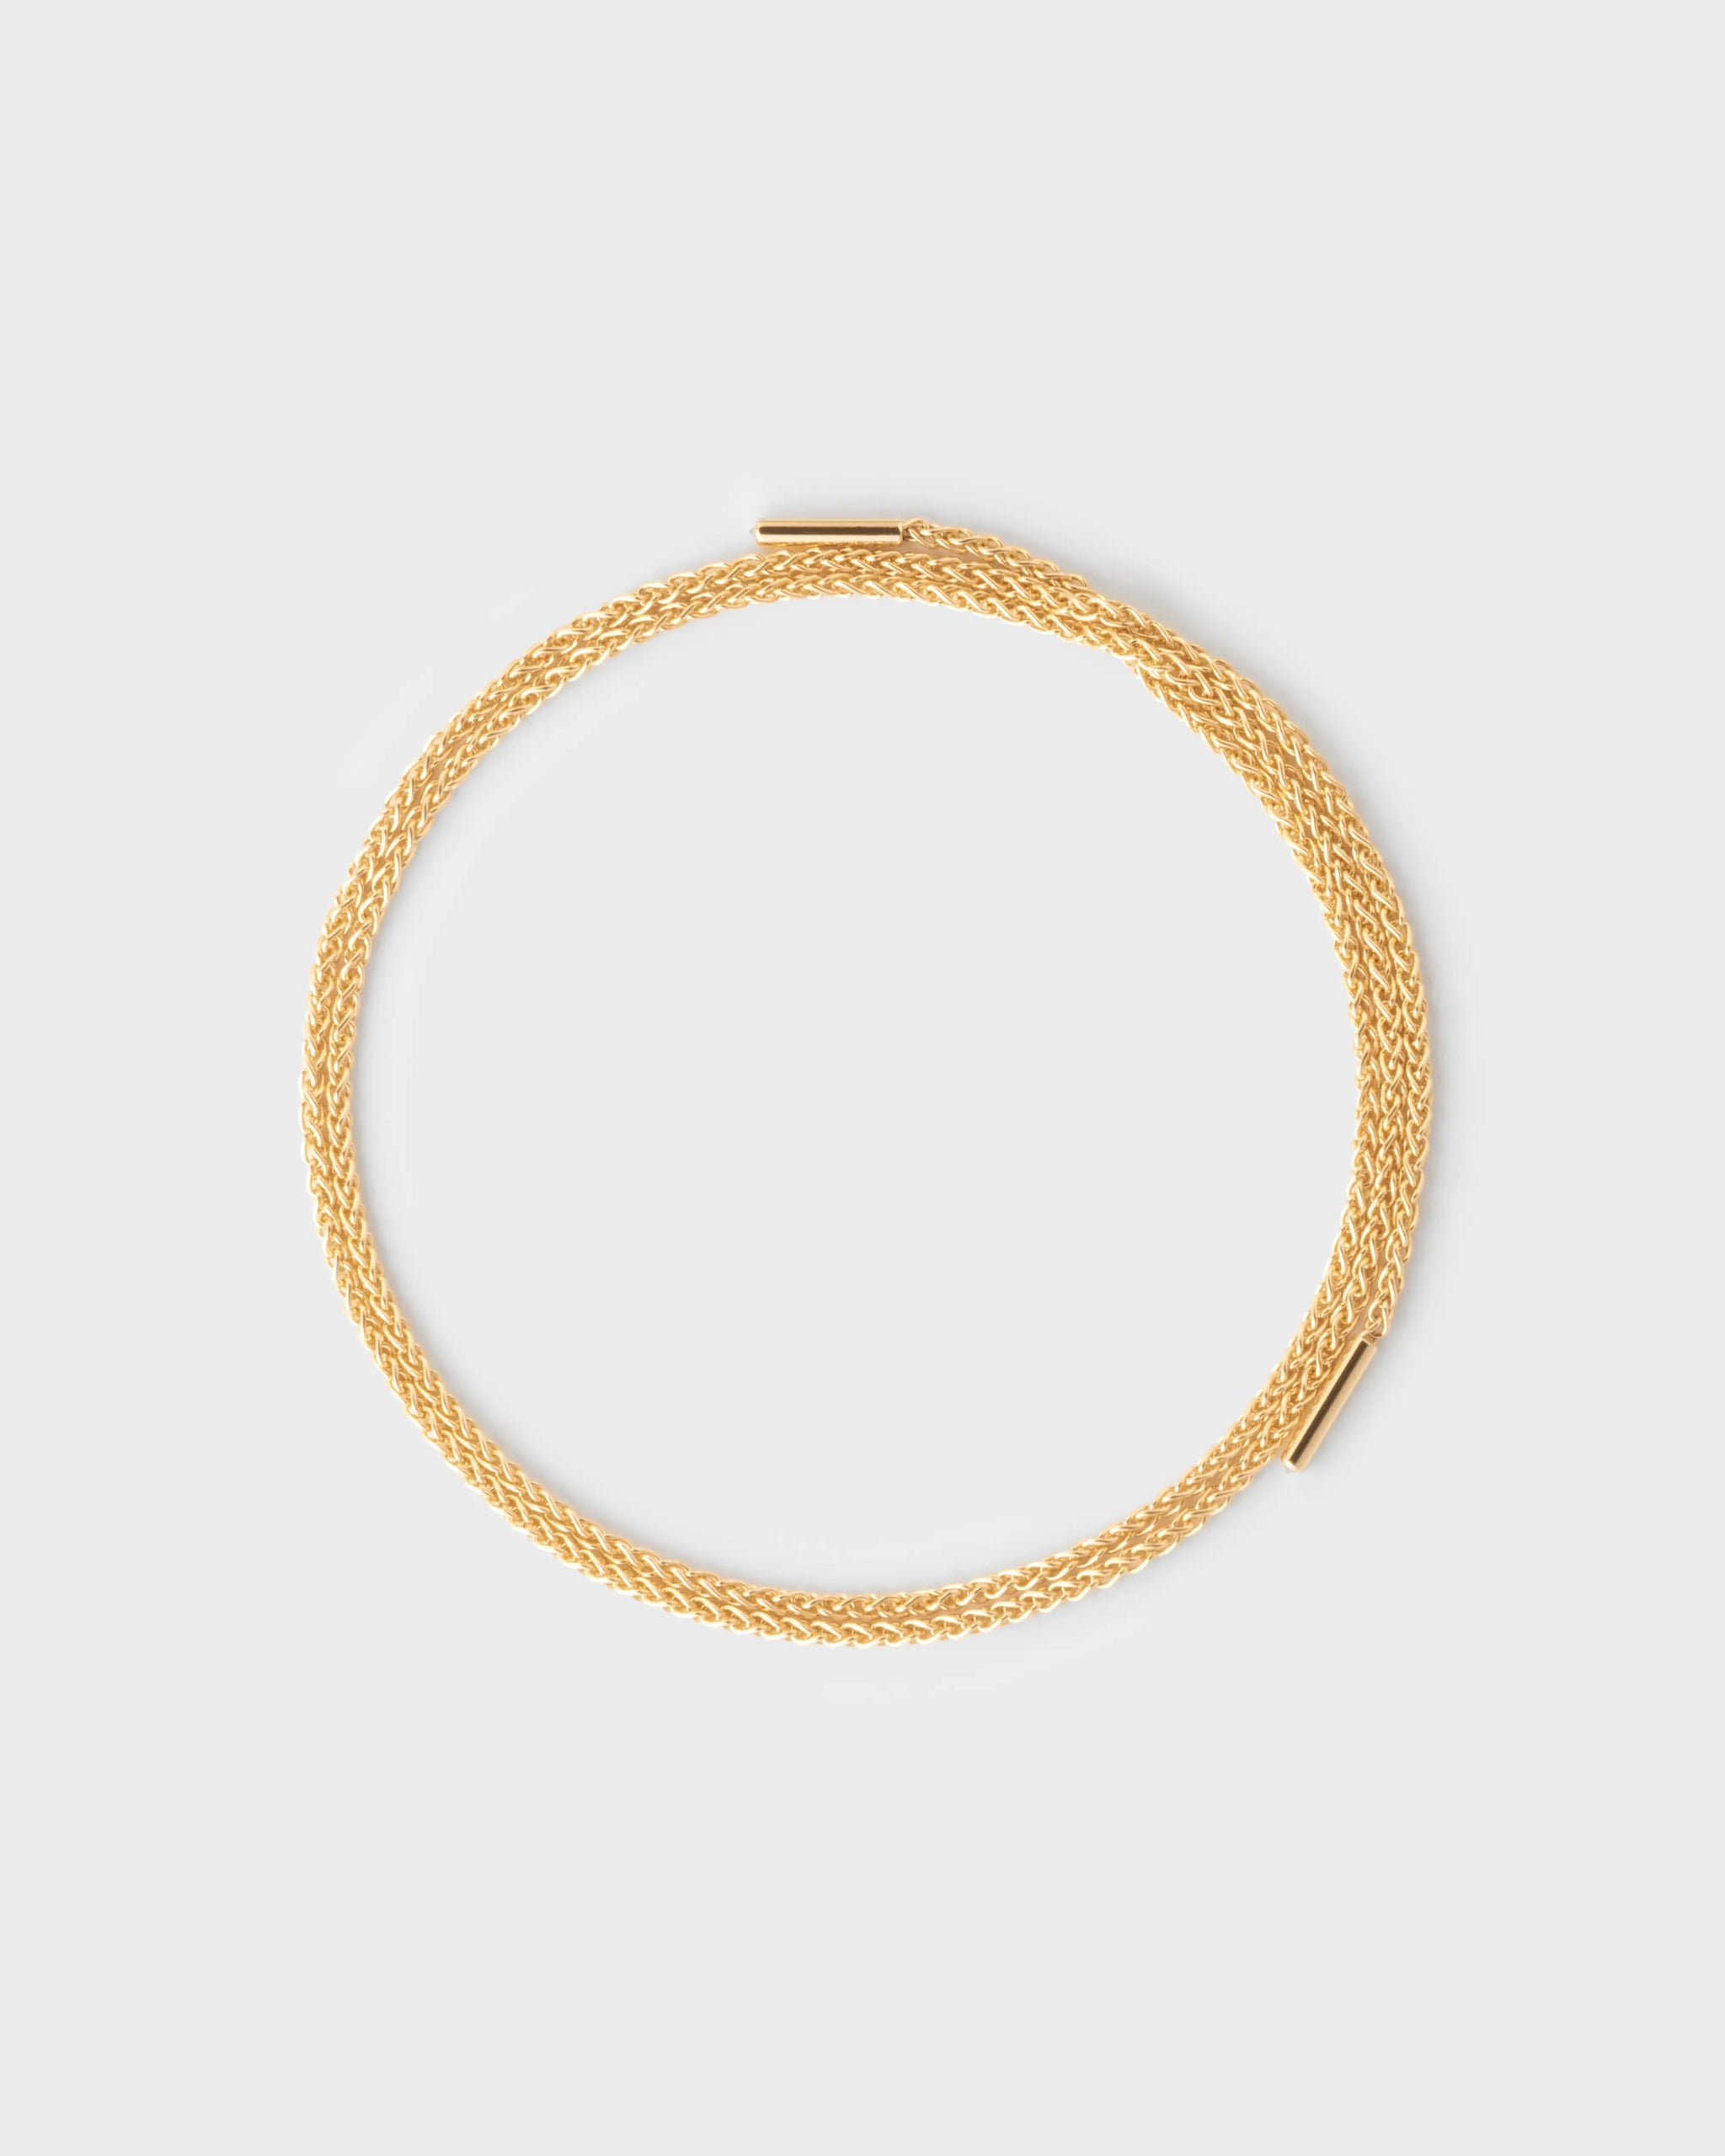 MM Latch Chain in Yellow Gold - 1 - Nouvel Heritage